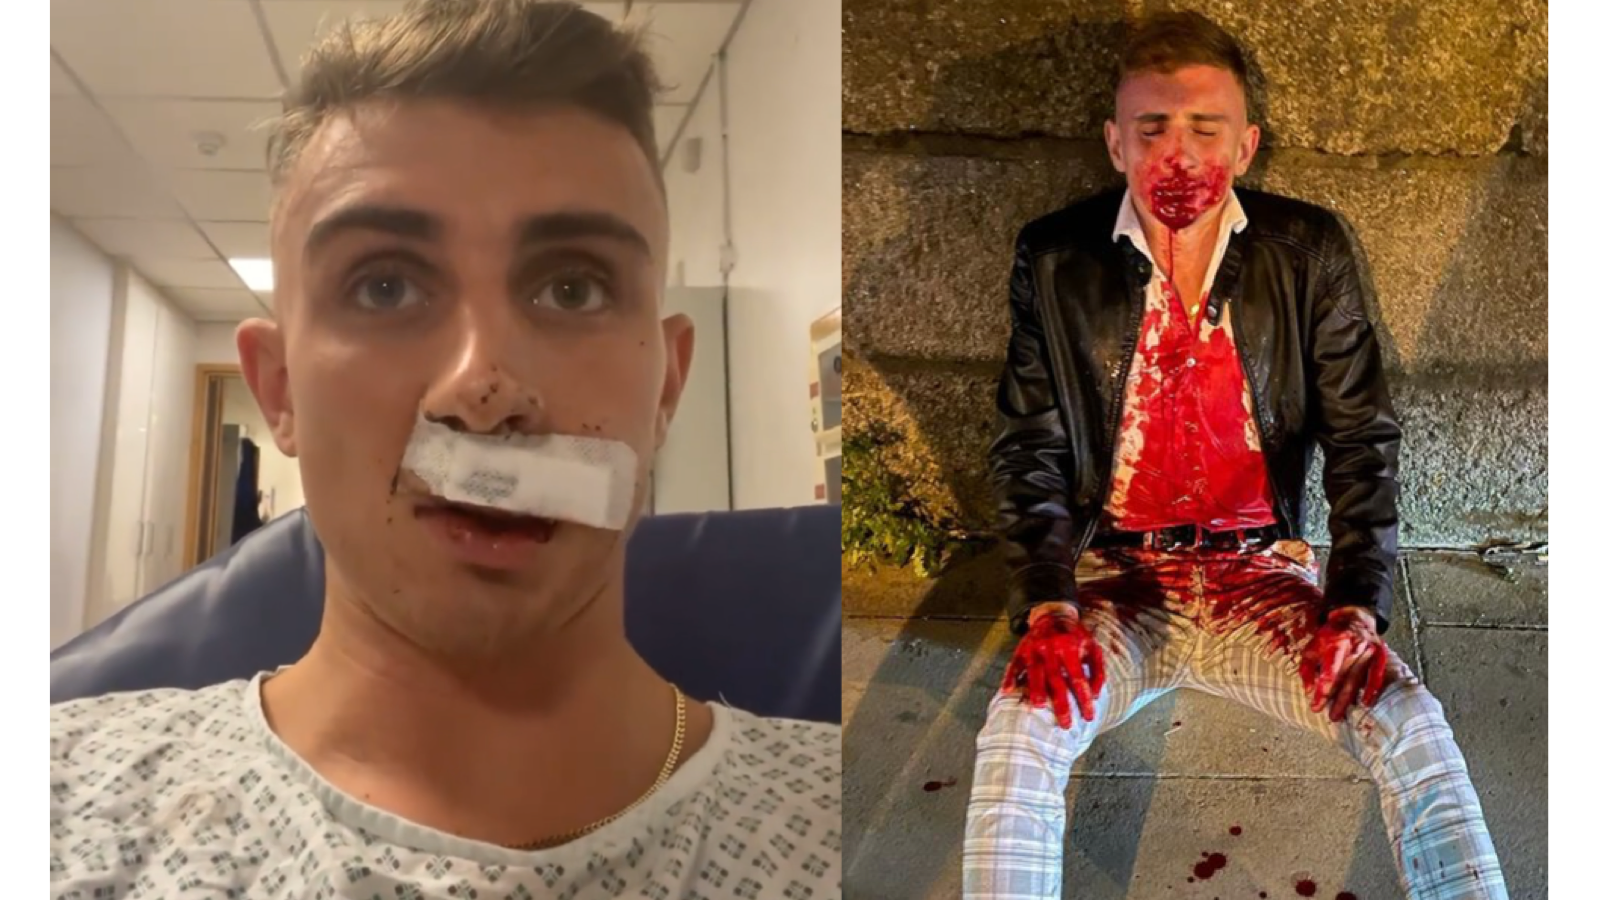 Jack Woolley was punched by "mistake" in the streets of Dublin. His lip will require surgery to be repaired.